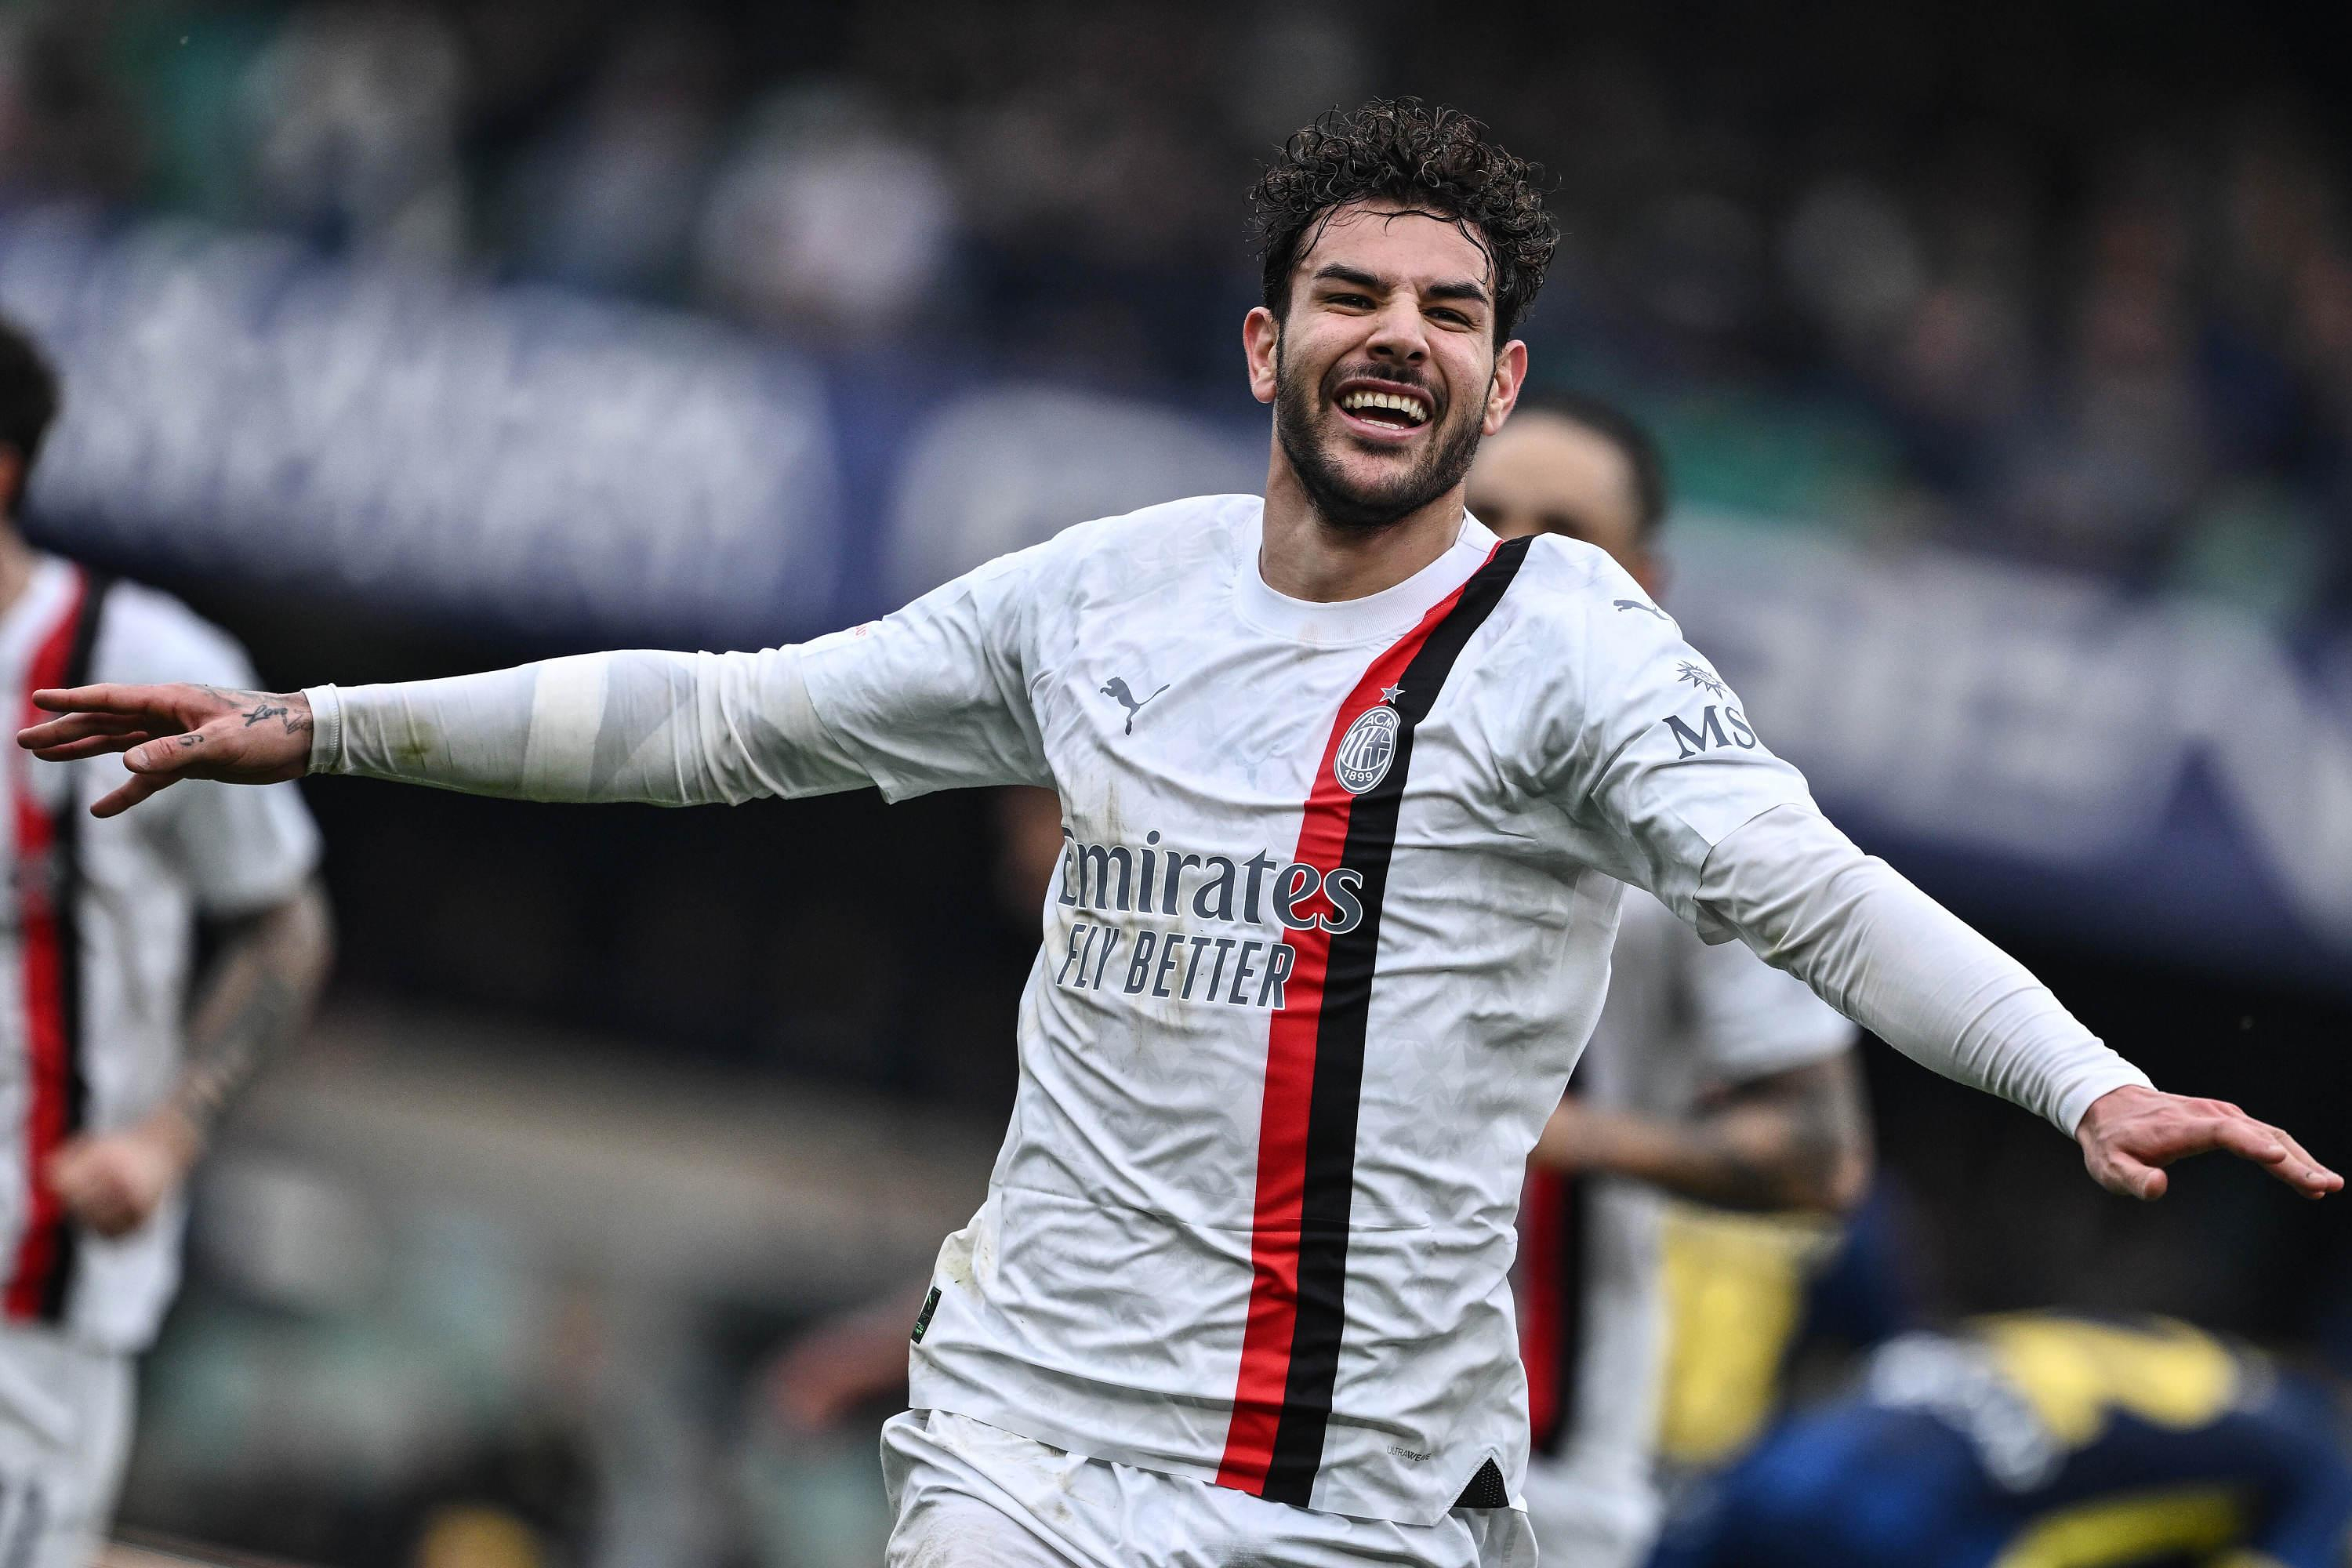 Serie A: AC Milan dominates Hellas Verona and remains runner-up to Inter